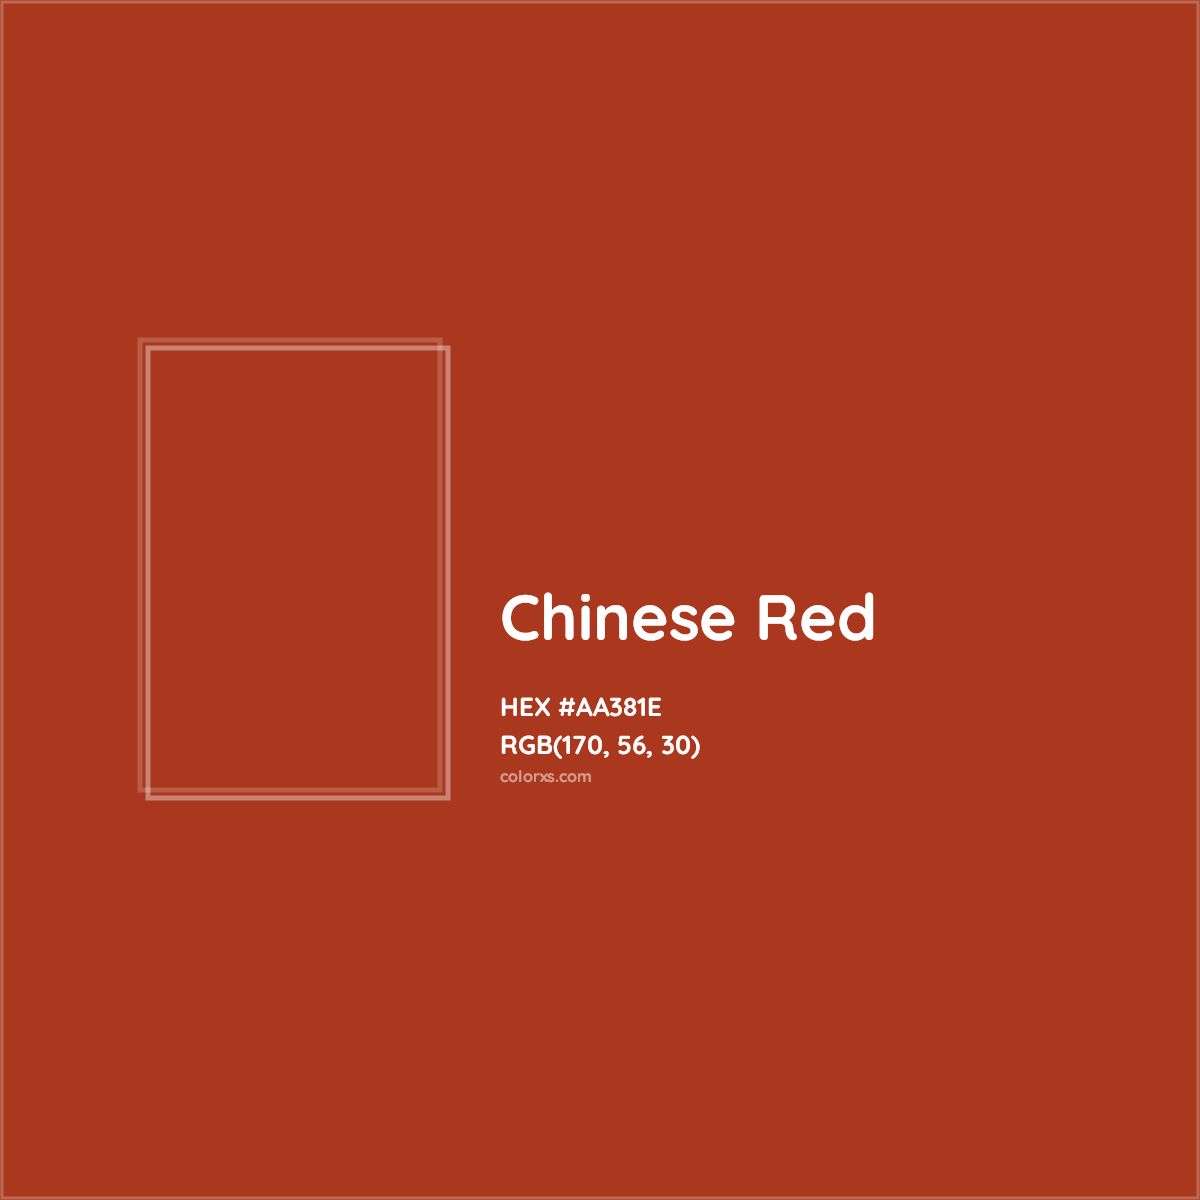 HEX #AA381E Chinese Red Color - Color Code